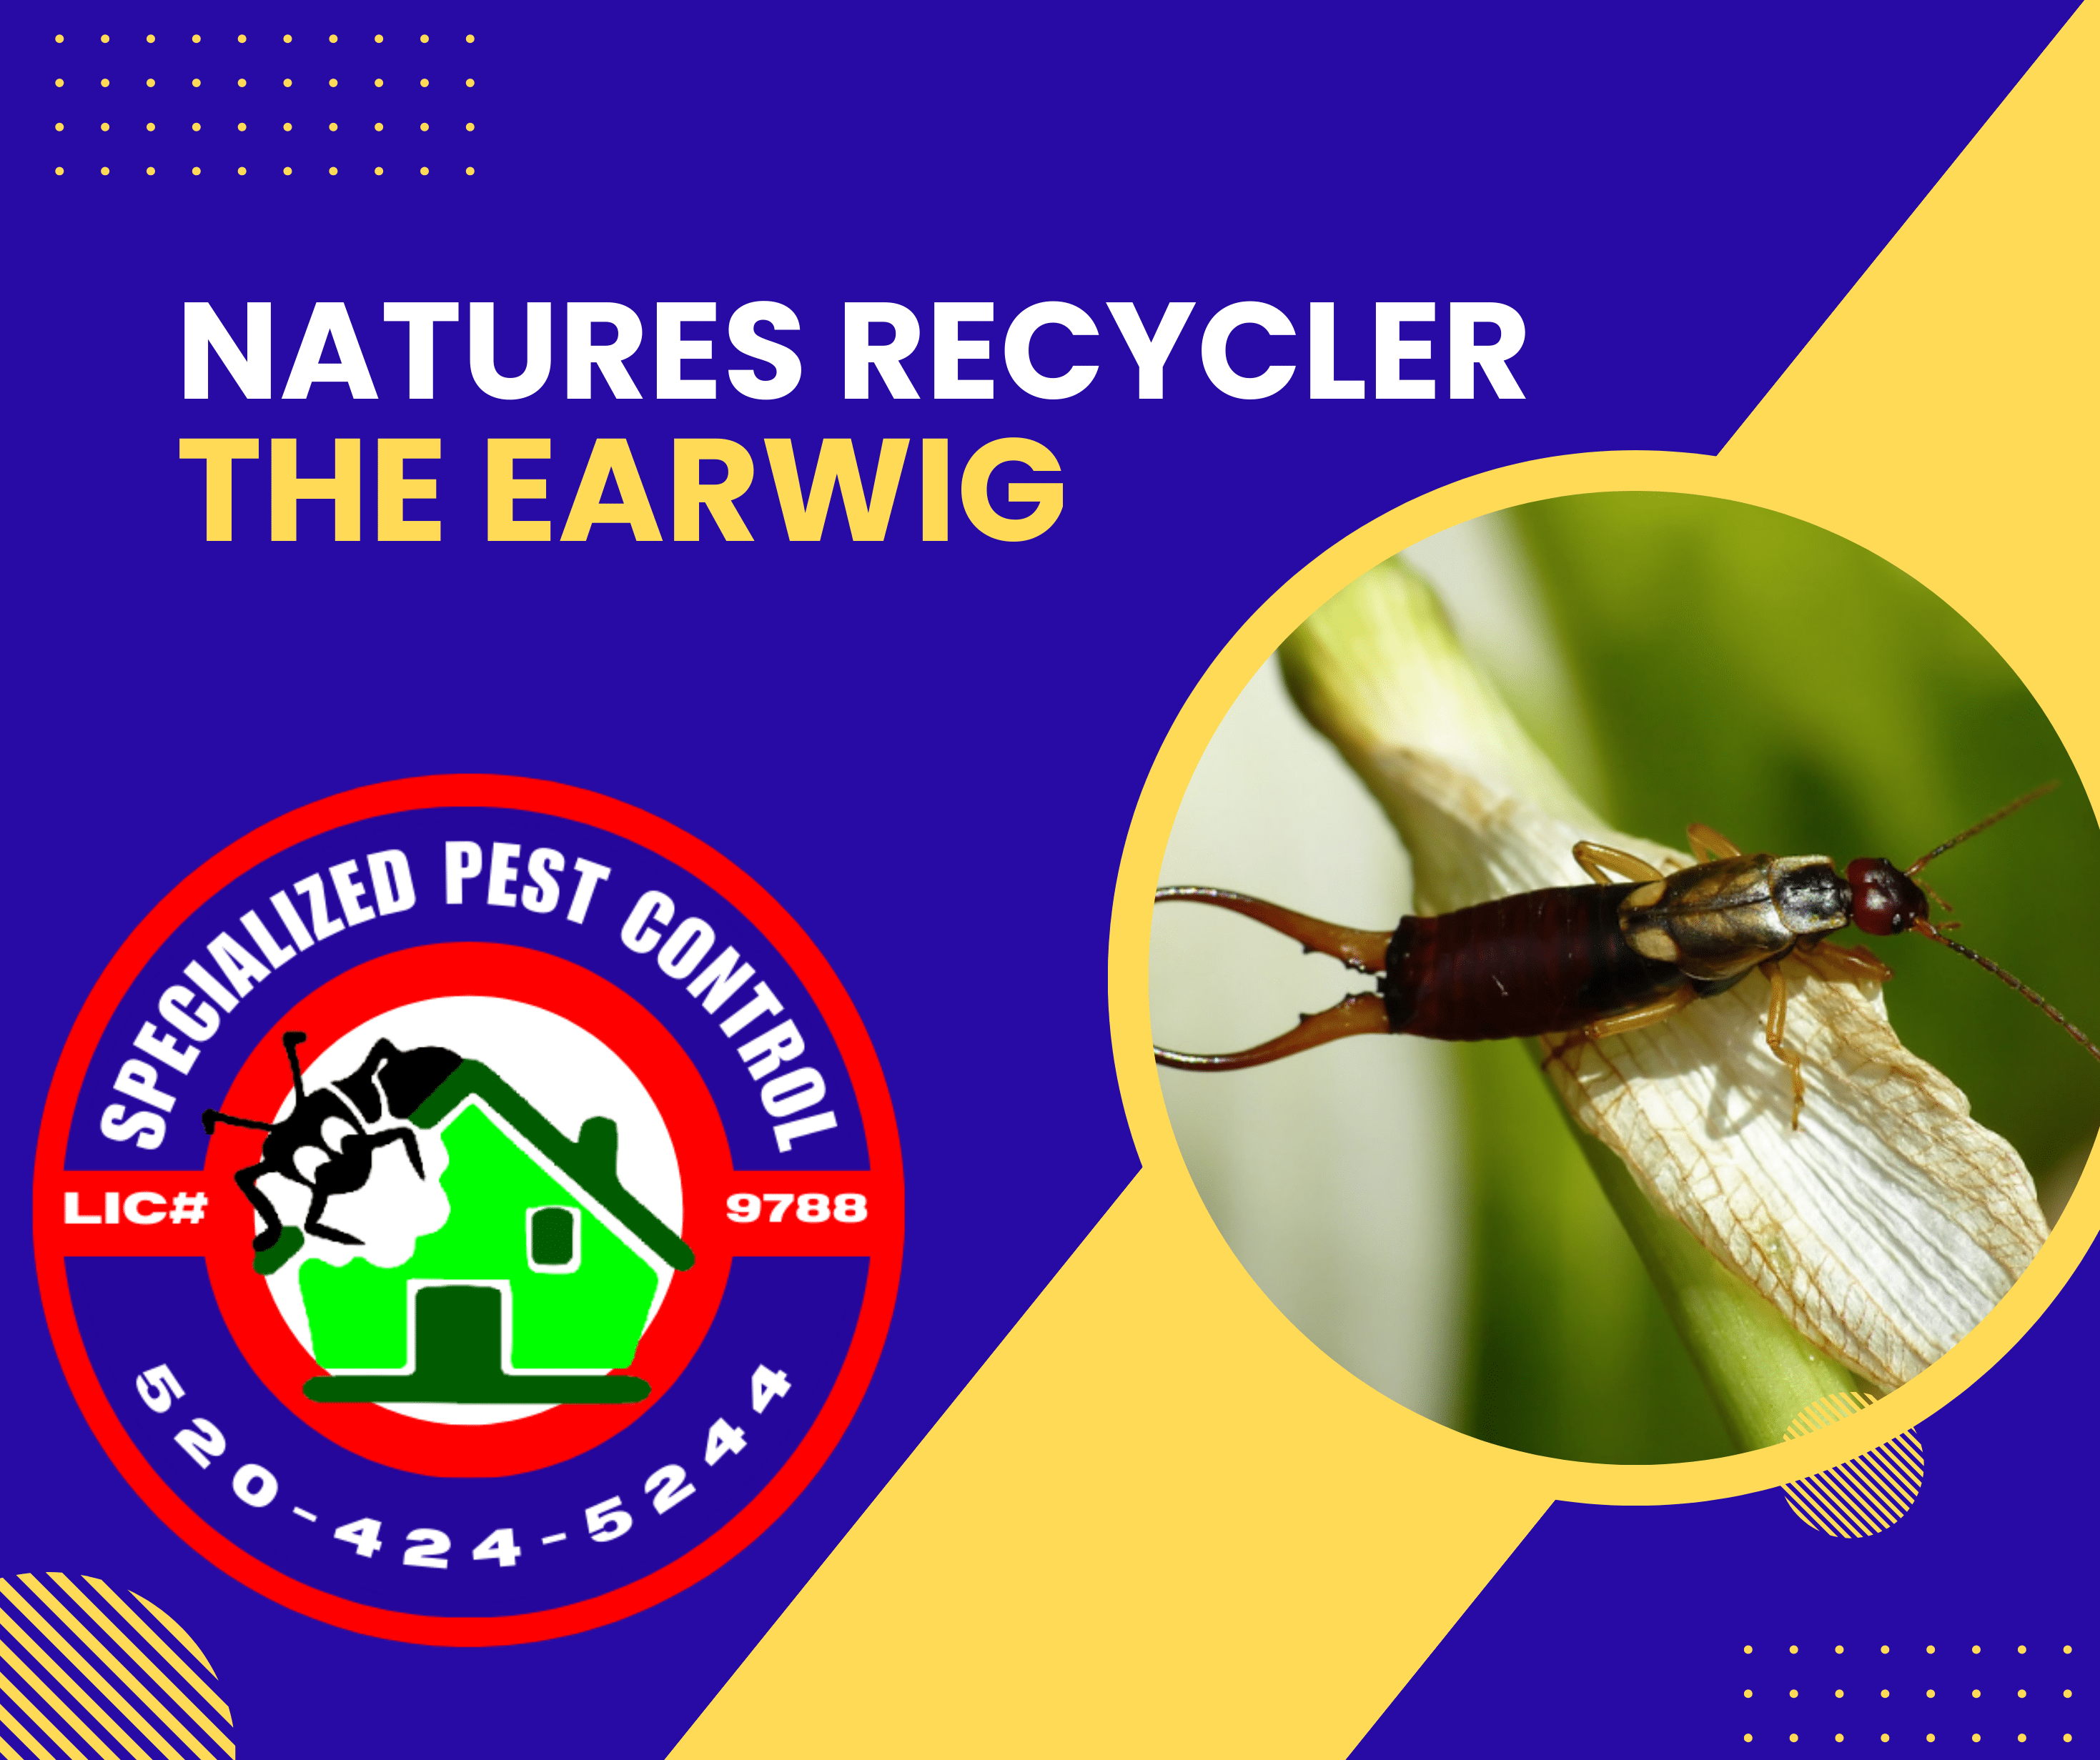 NATURES RECYCLER THE EARWIG